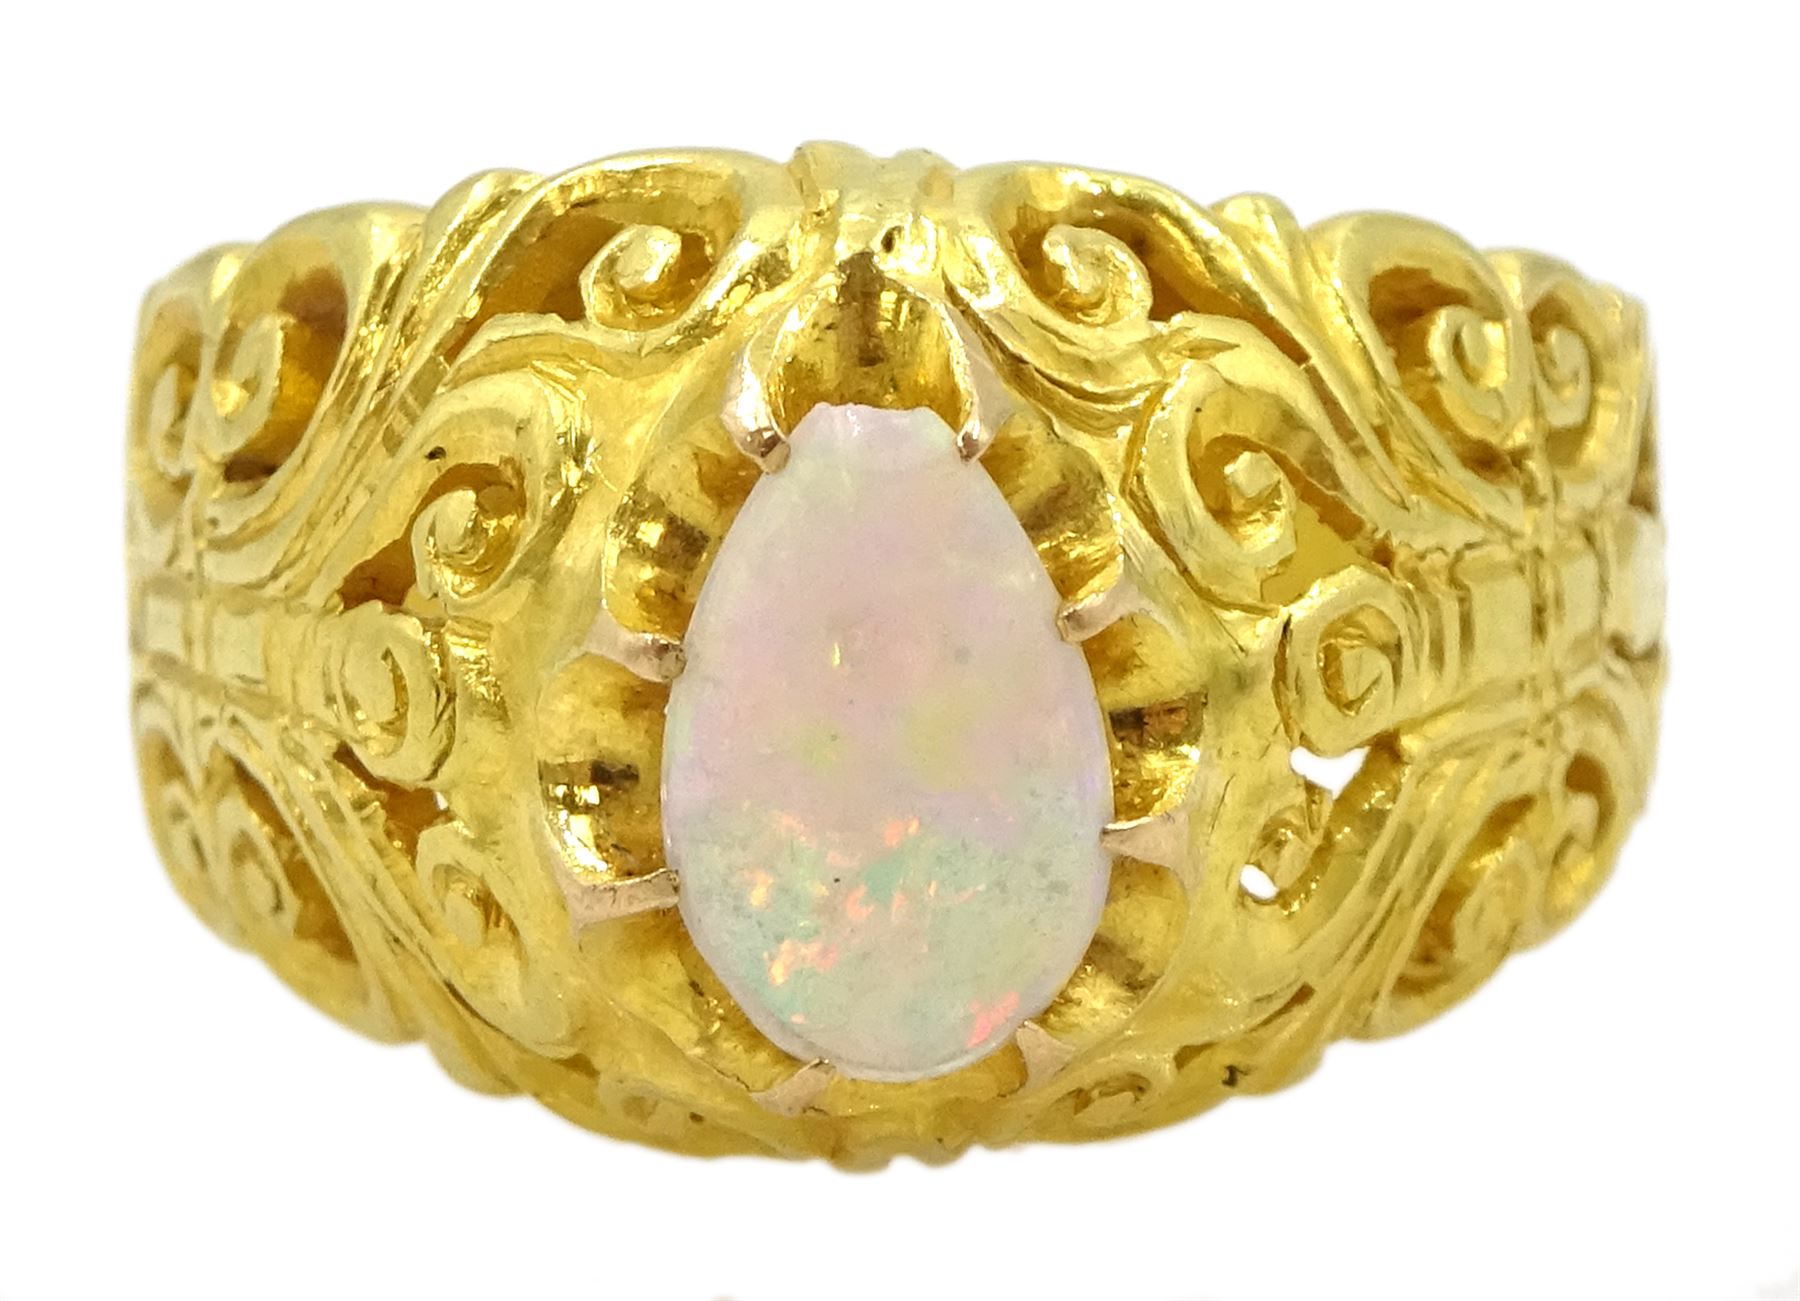 20ct gold single stone pear shaped opal ring - Image 3 of 5